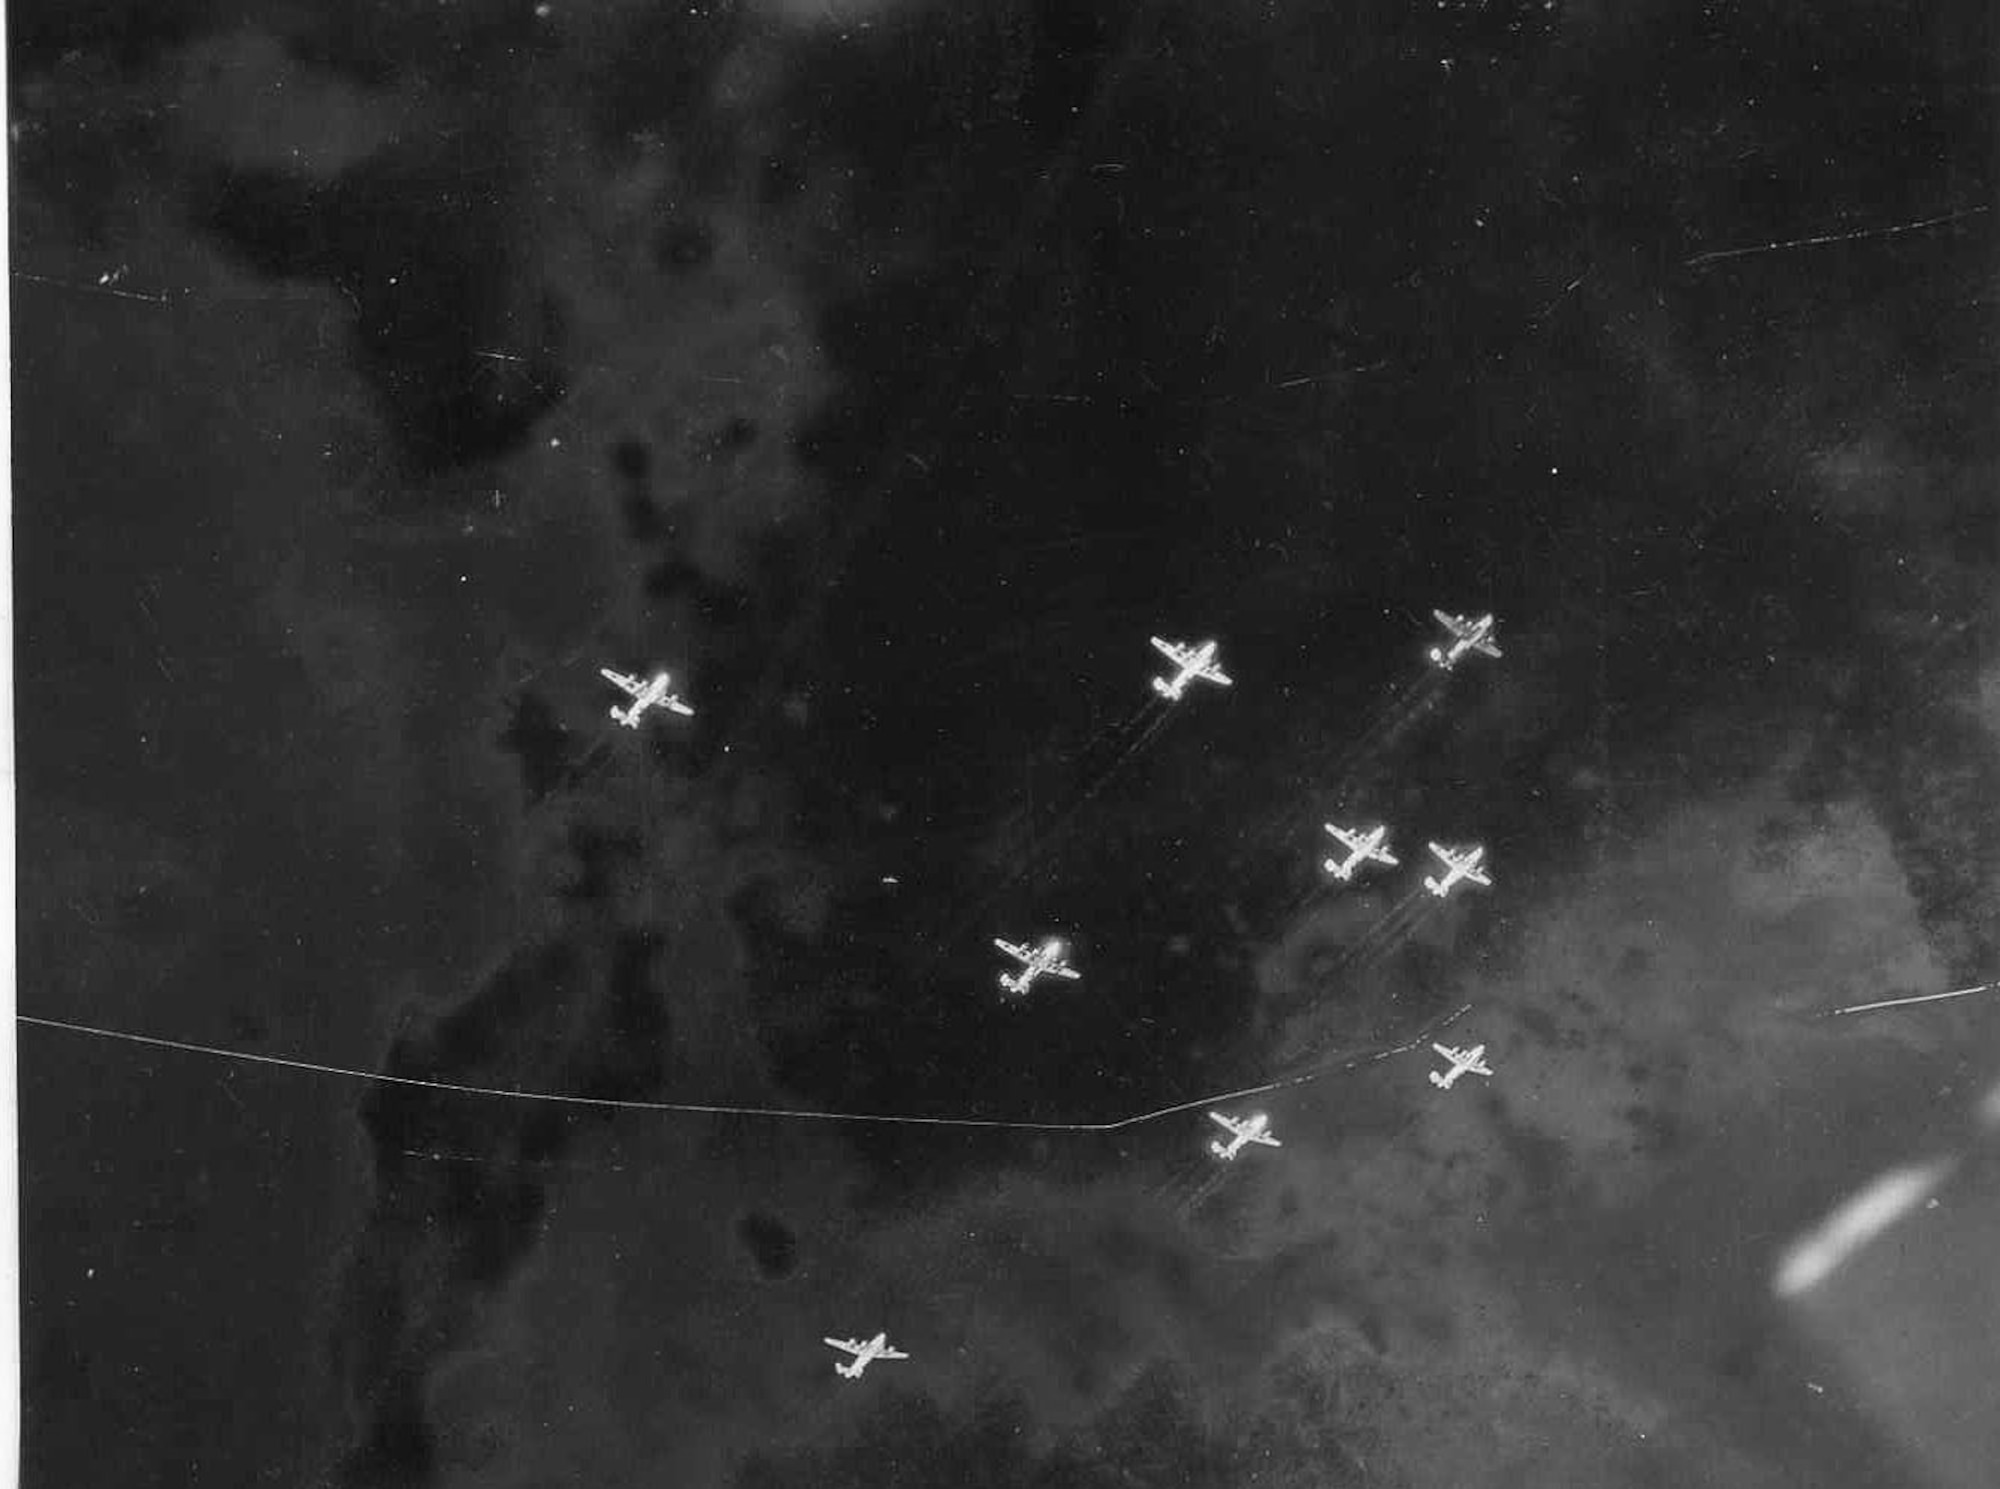 A 446th Bombardment Group formation on D-Day. (Courtesy of the Norfolk and Suffolk Aviation Museum)